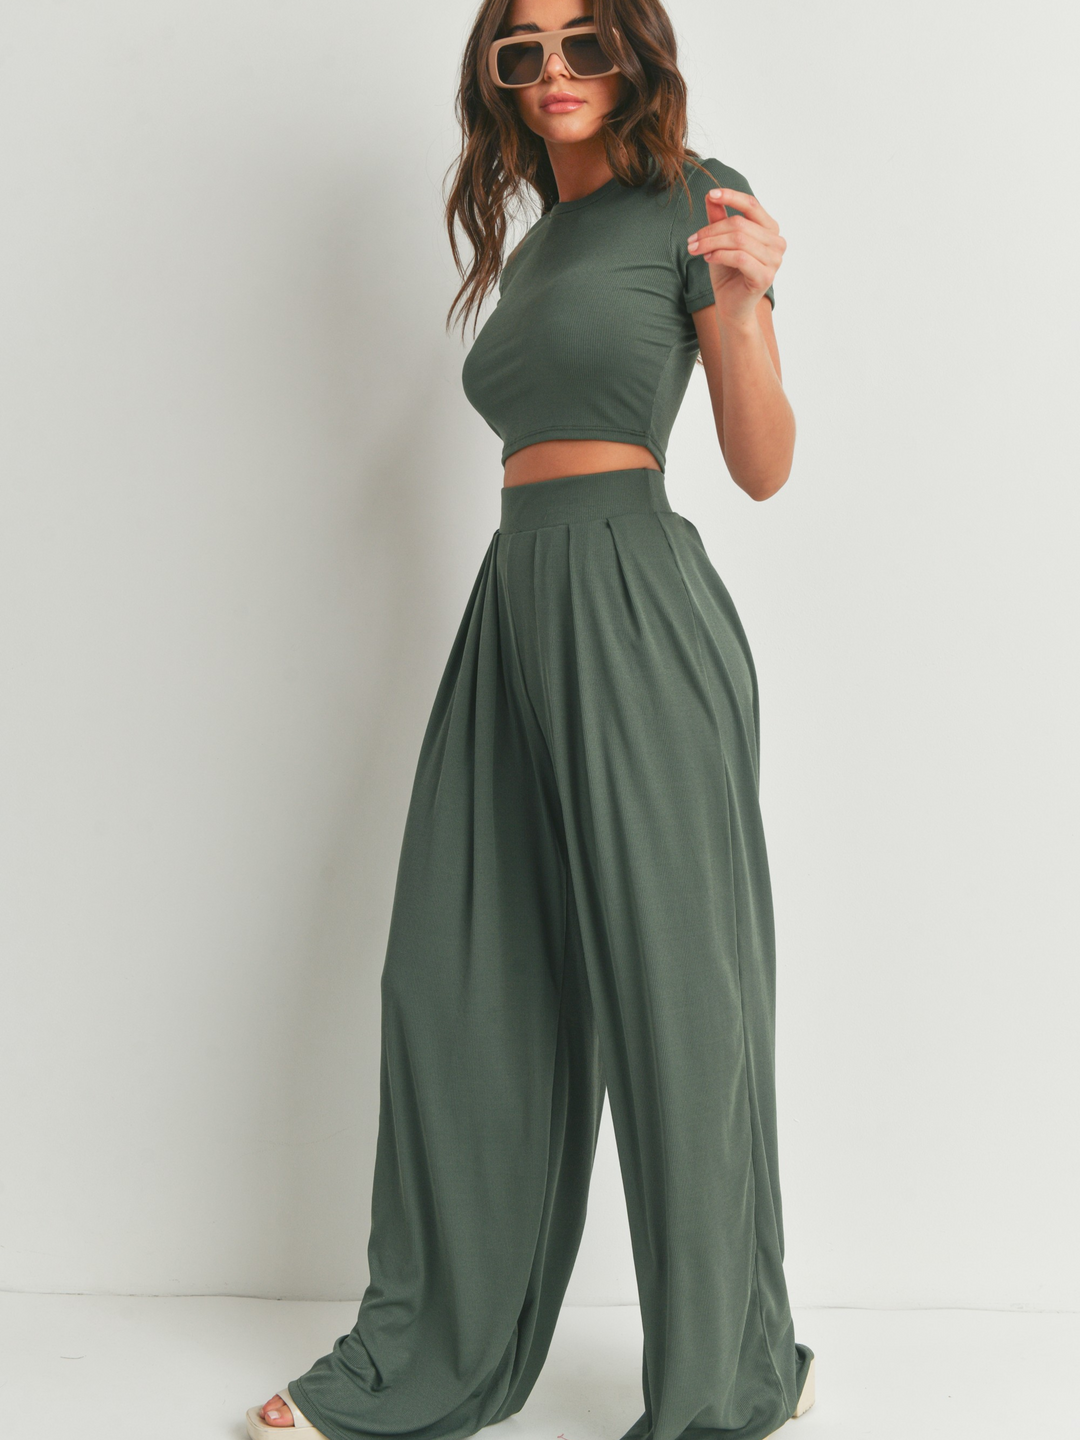 Keep it Classy Crop Top Wide Leg Pant Set-Forest Green [PRE-ORDER EST. TO SHIP 5/19-5/24] - Eb and Flo